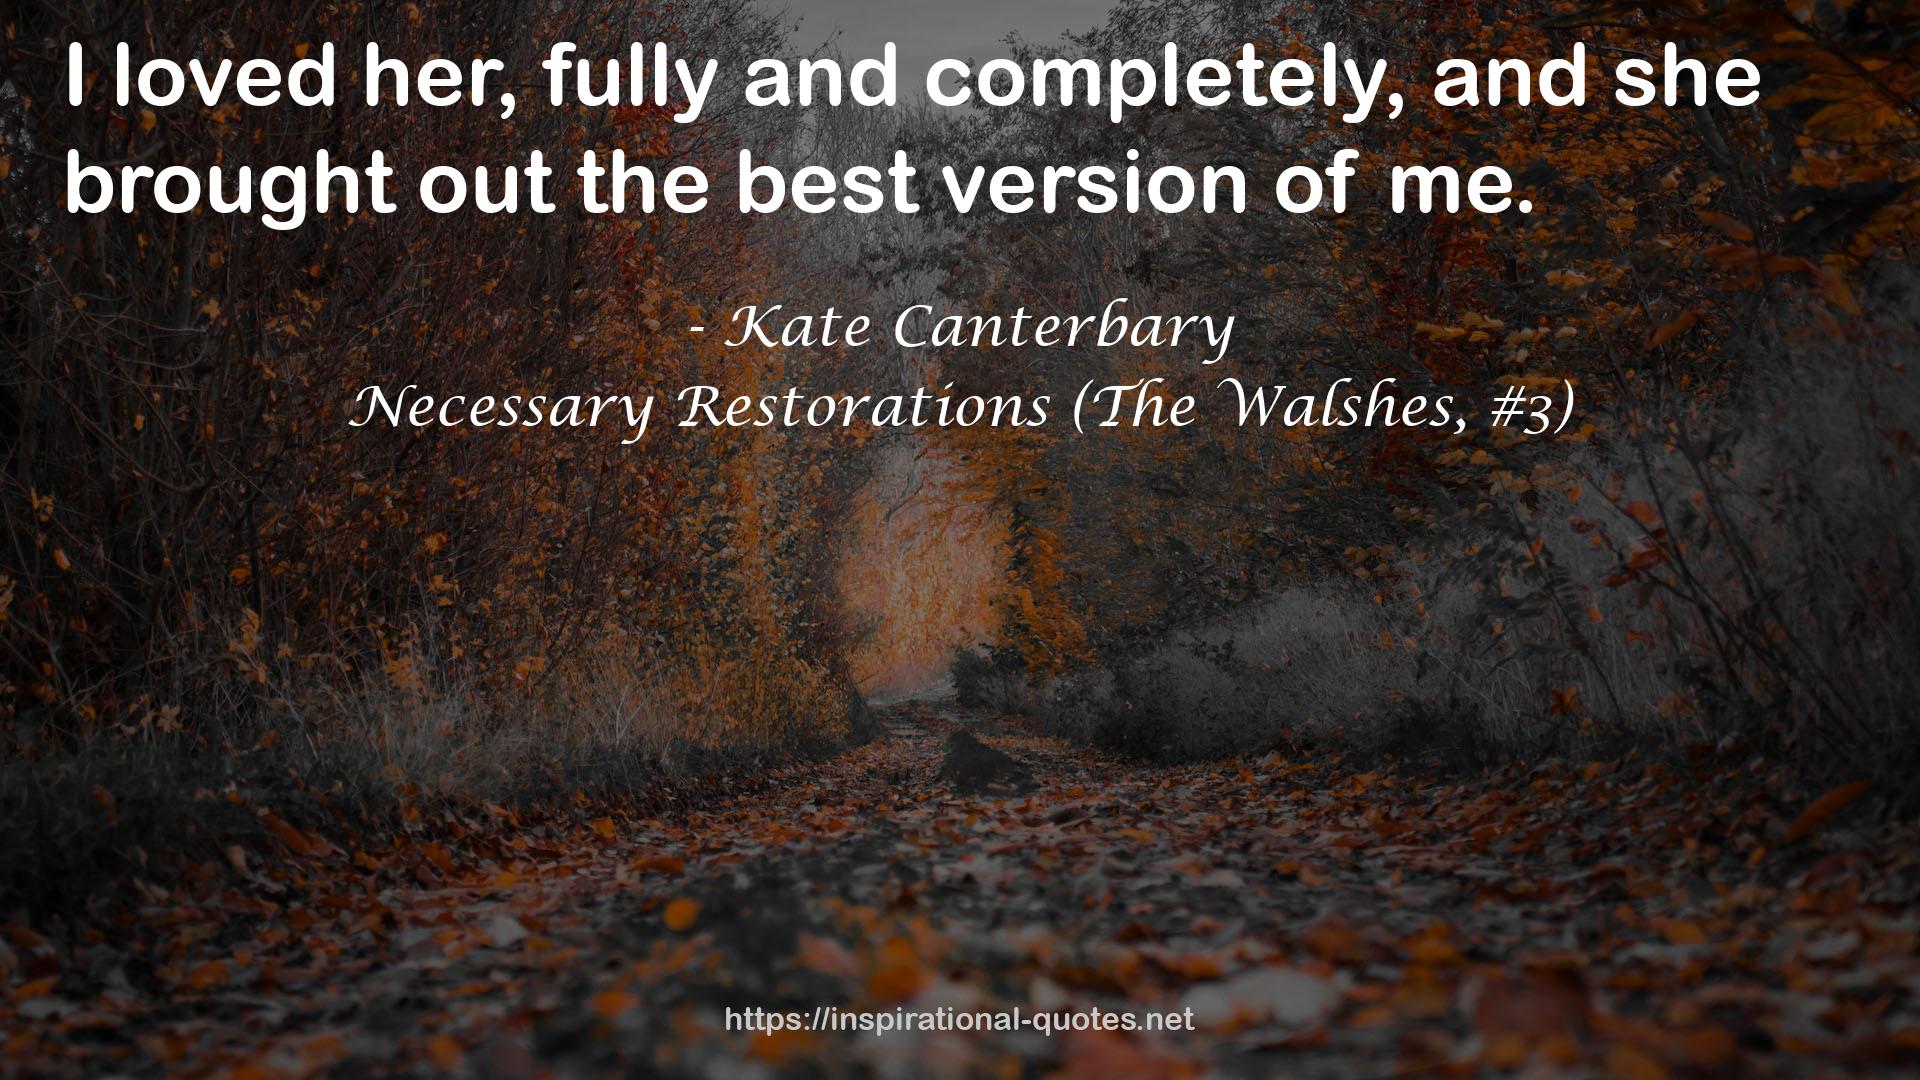 Necessary Restorations (The Walshes, #3) QUOTES